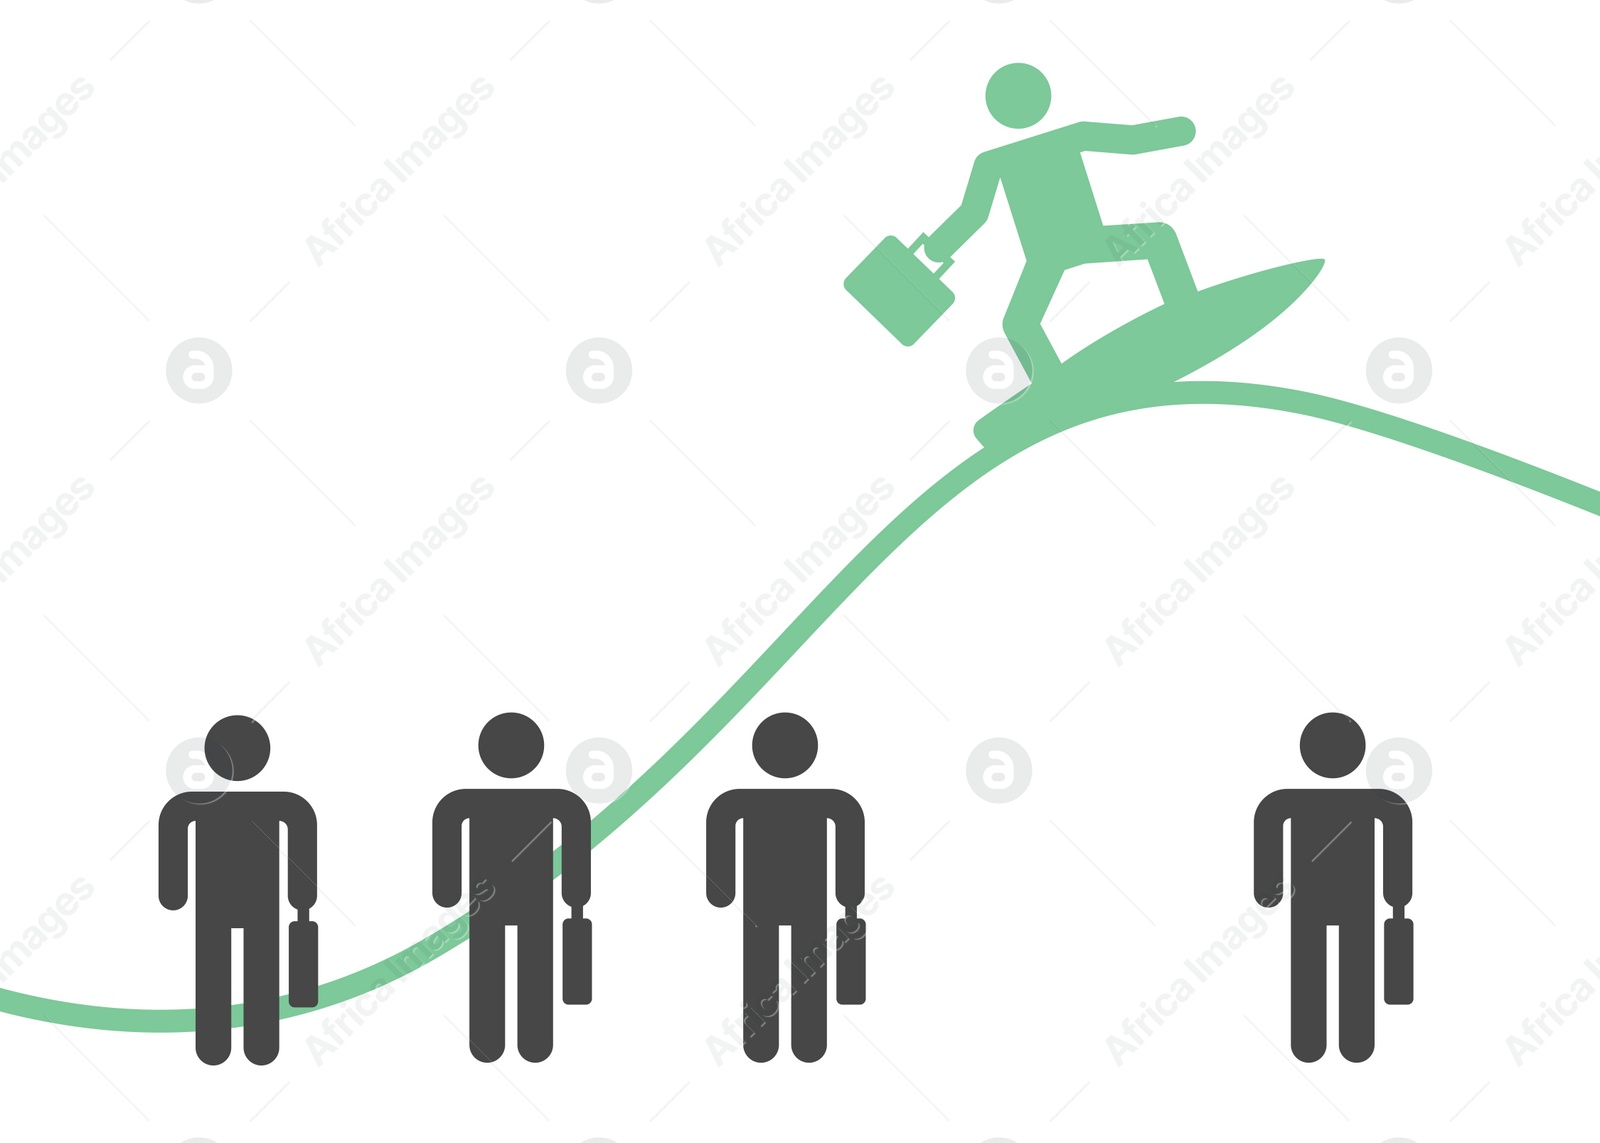 Illustration of Competition concept. Office workers and one surfing on white background. Illustration